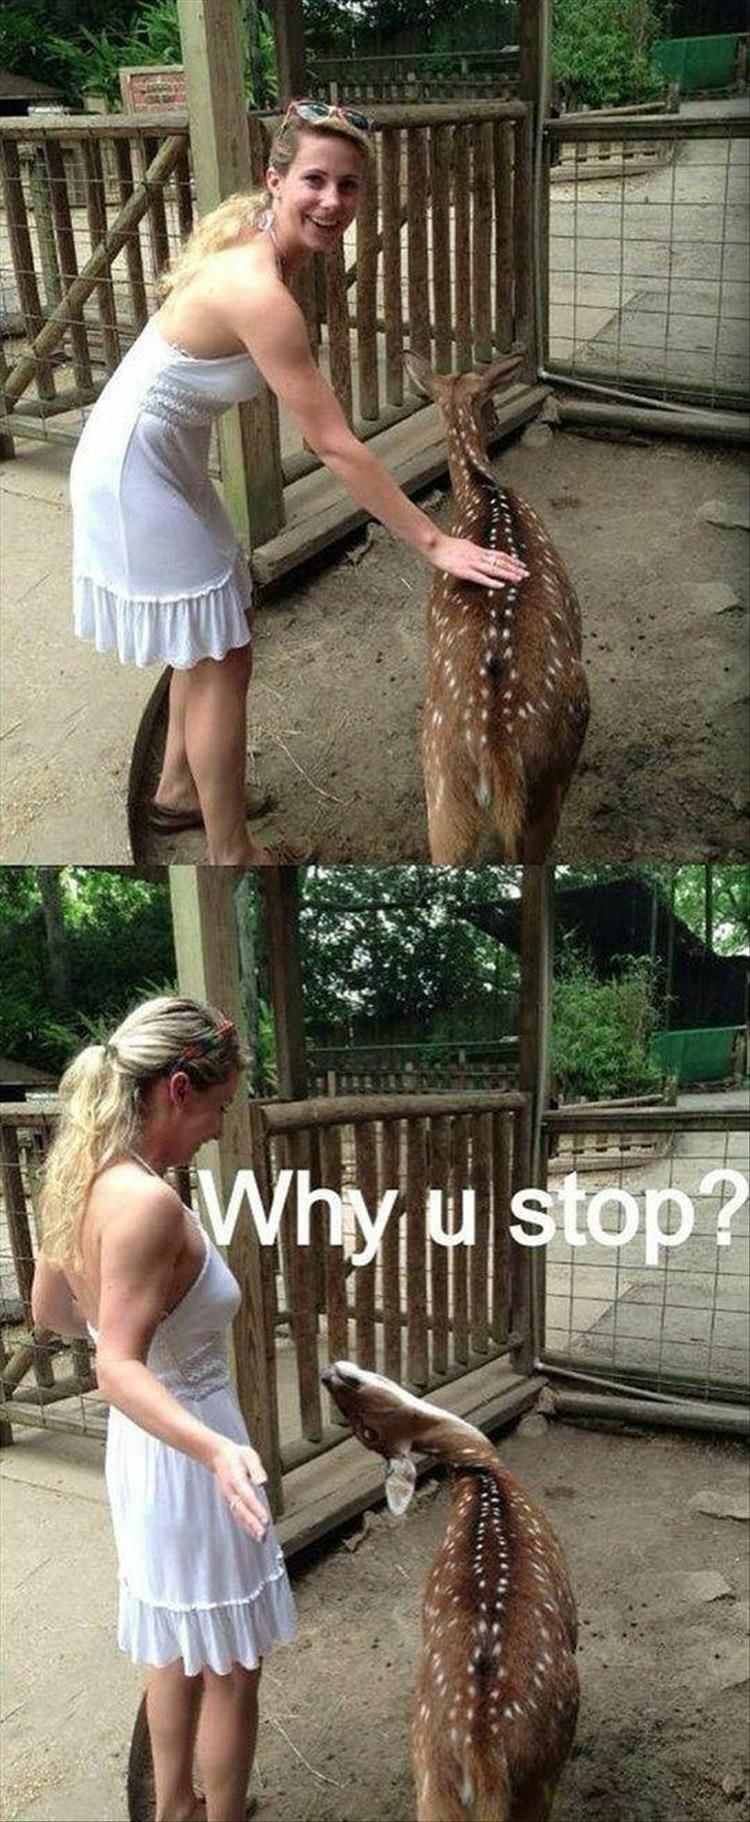 Funny meme of hot girl petting a deer that doesn't want to stop being pet